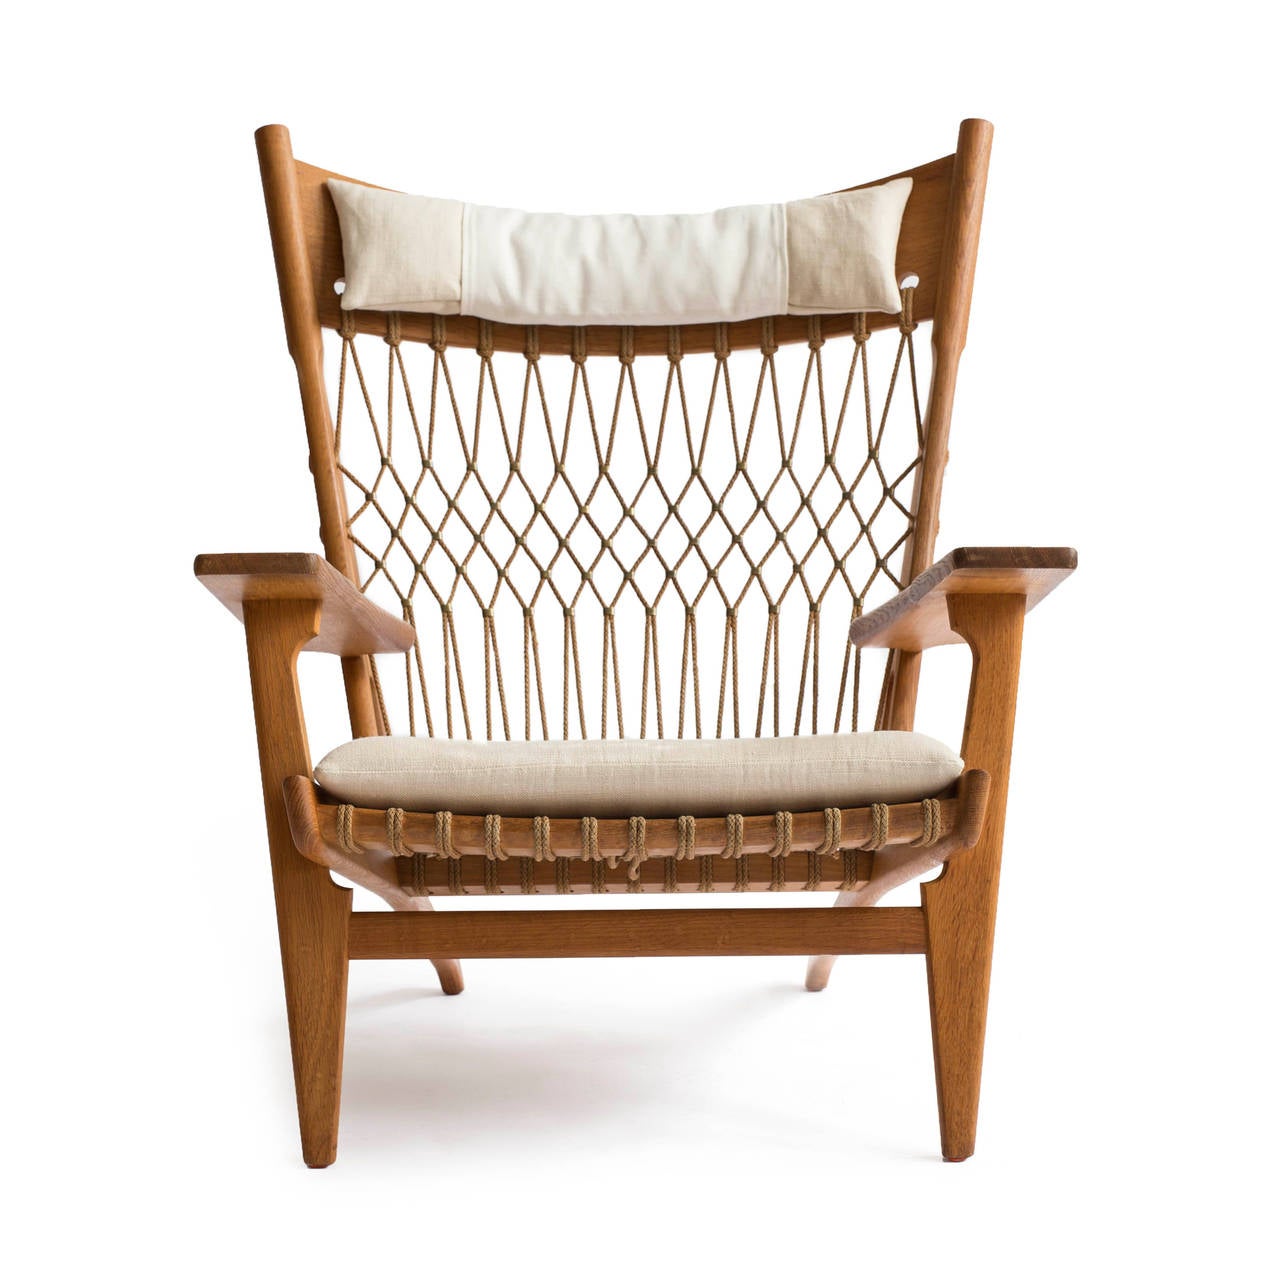 A rare Hans J. Wegner oak armchair model JH-719. 

Designed 1968 and made by cabinetmaker Johannes Hansen. 

Frame of oak, seat and back with woven flag line and brass details. Seat and head cushions upholstered with light fabric. 

Very fine